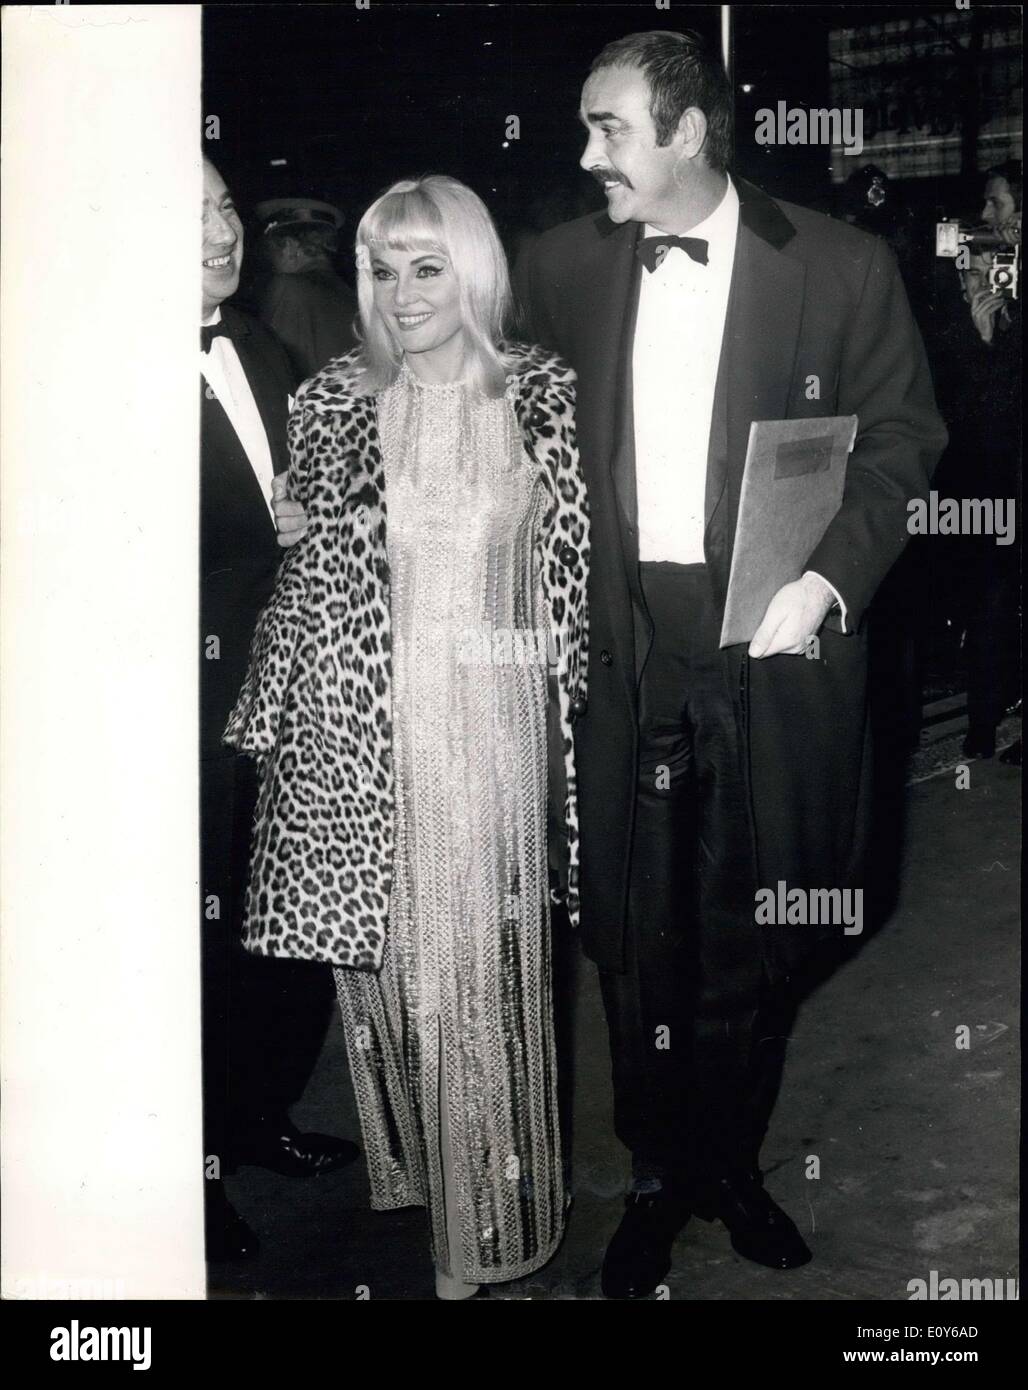 Dec. 12, 1968 - Premiere of ''Shalalo''.: H.R.H. Princess Margaret last night attended the Royal charity permiere of the film Shalako, at the Leicester Square Theatre, London. The premiere, sponsored by the Variety Club of Great Britain, as in ais of the Dockland Settlements, the Jewish National Fund Charitable Trust, and Variety's Heart Fun for under-privileged children. The stars of the film are Sean Connery and Brigitte Bardot. Photo shows one of the stars of the film, Sean Connery, and his actress wife. Diane Cileno, arriving for last night's premiere. Stock Photo